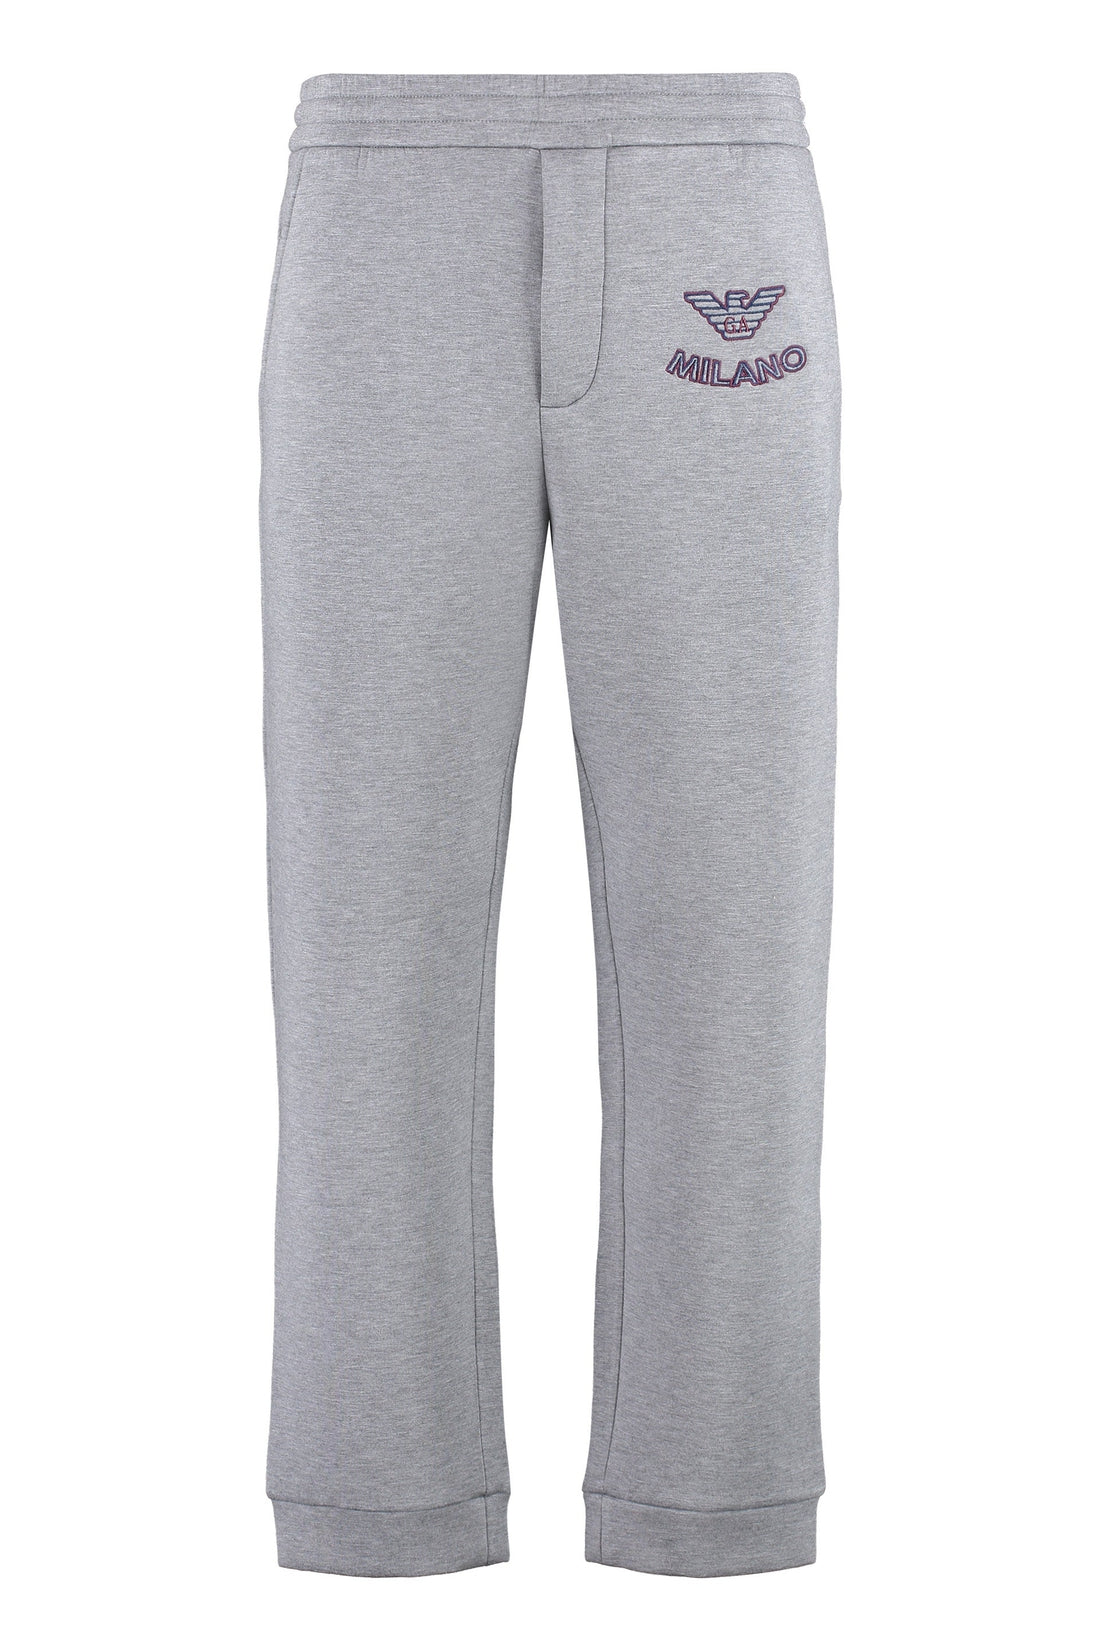 Piralo-OUTLET-SALE-Embroidered sweatpants-ARCHIVIST